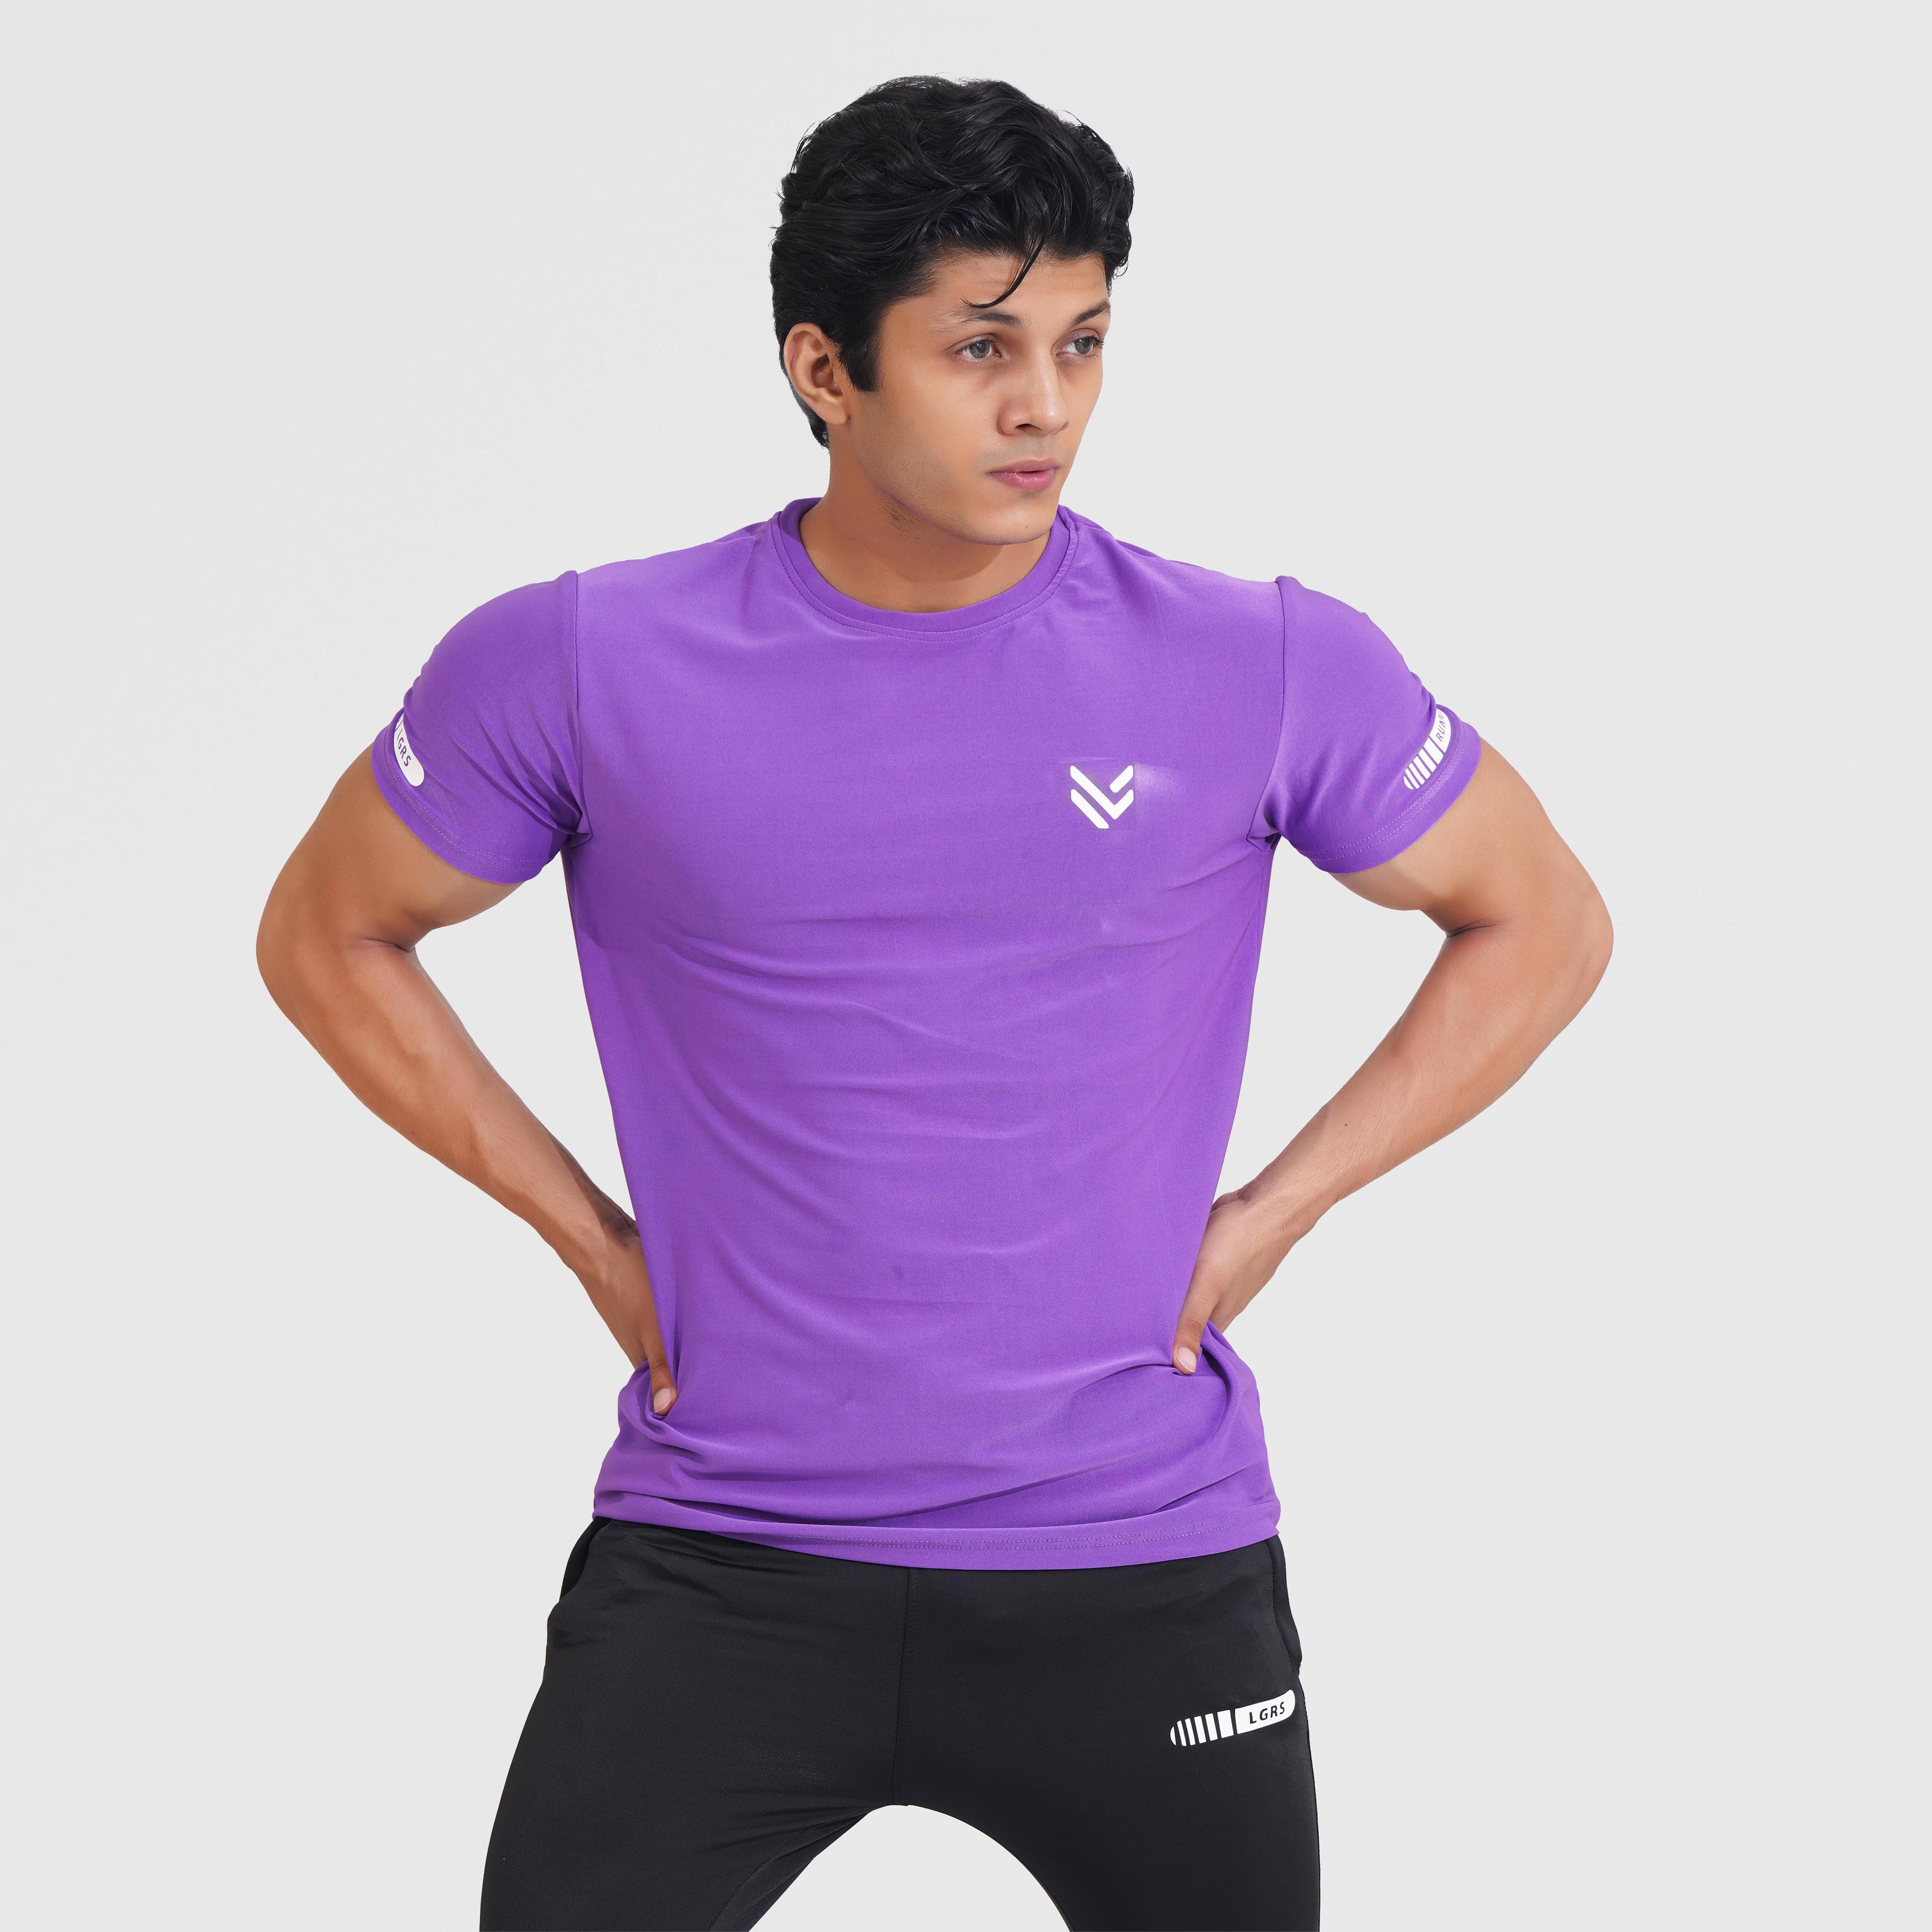 EliteFit Orchid Compression TEE